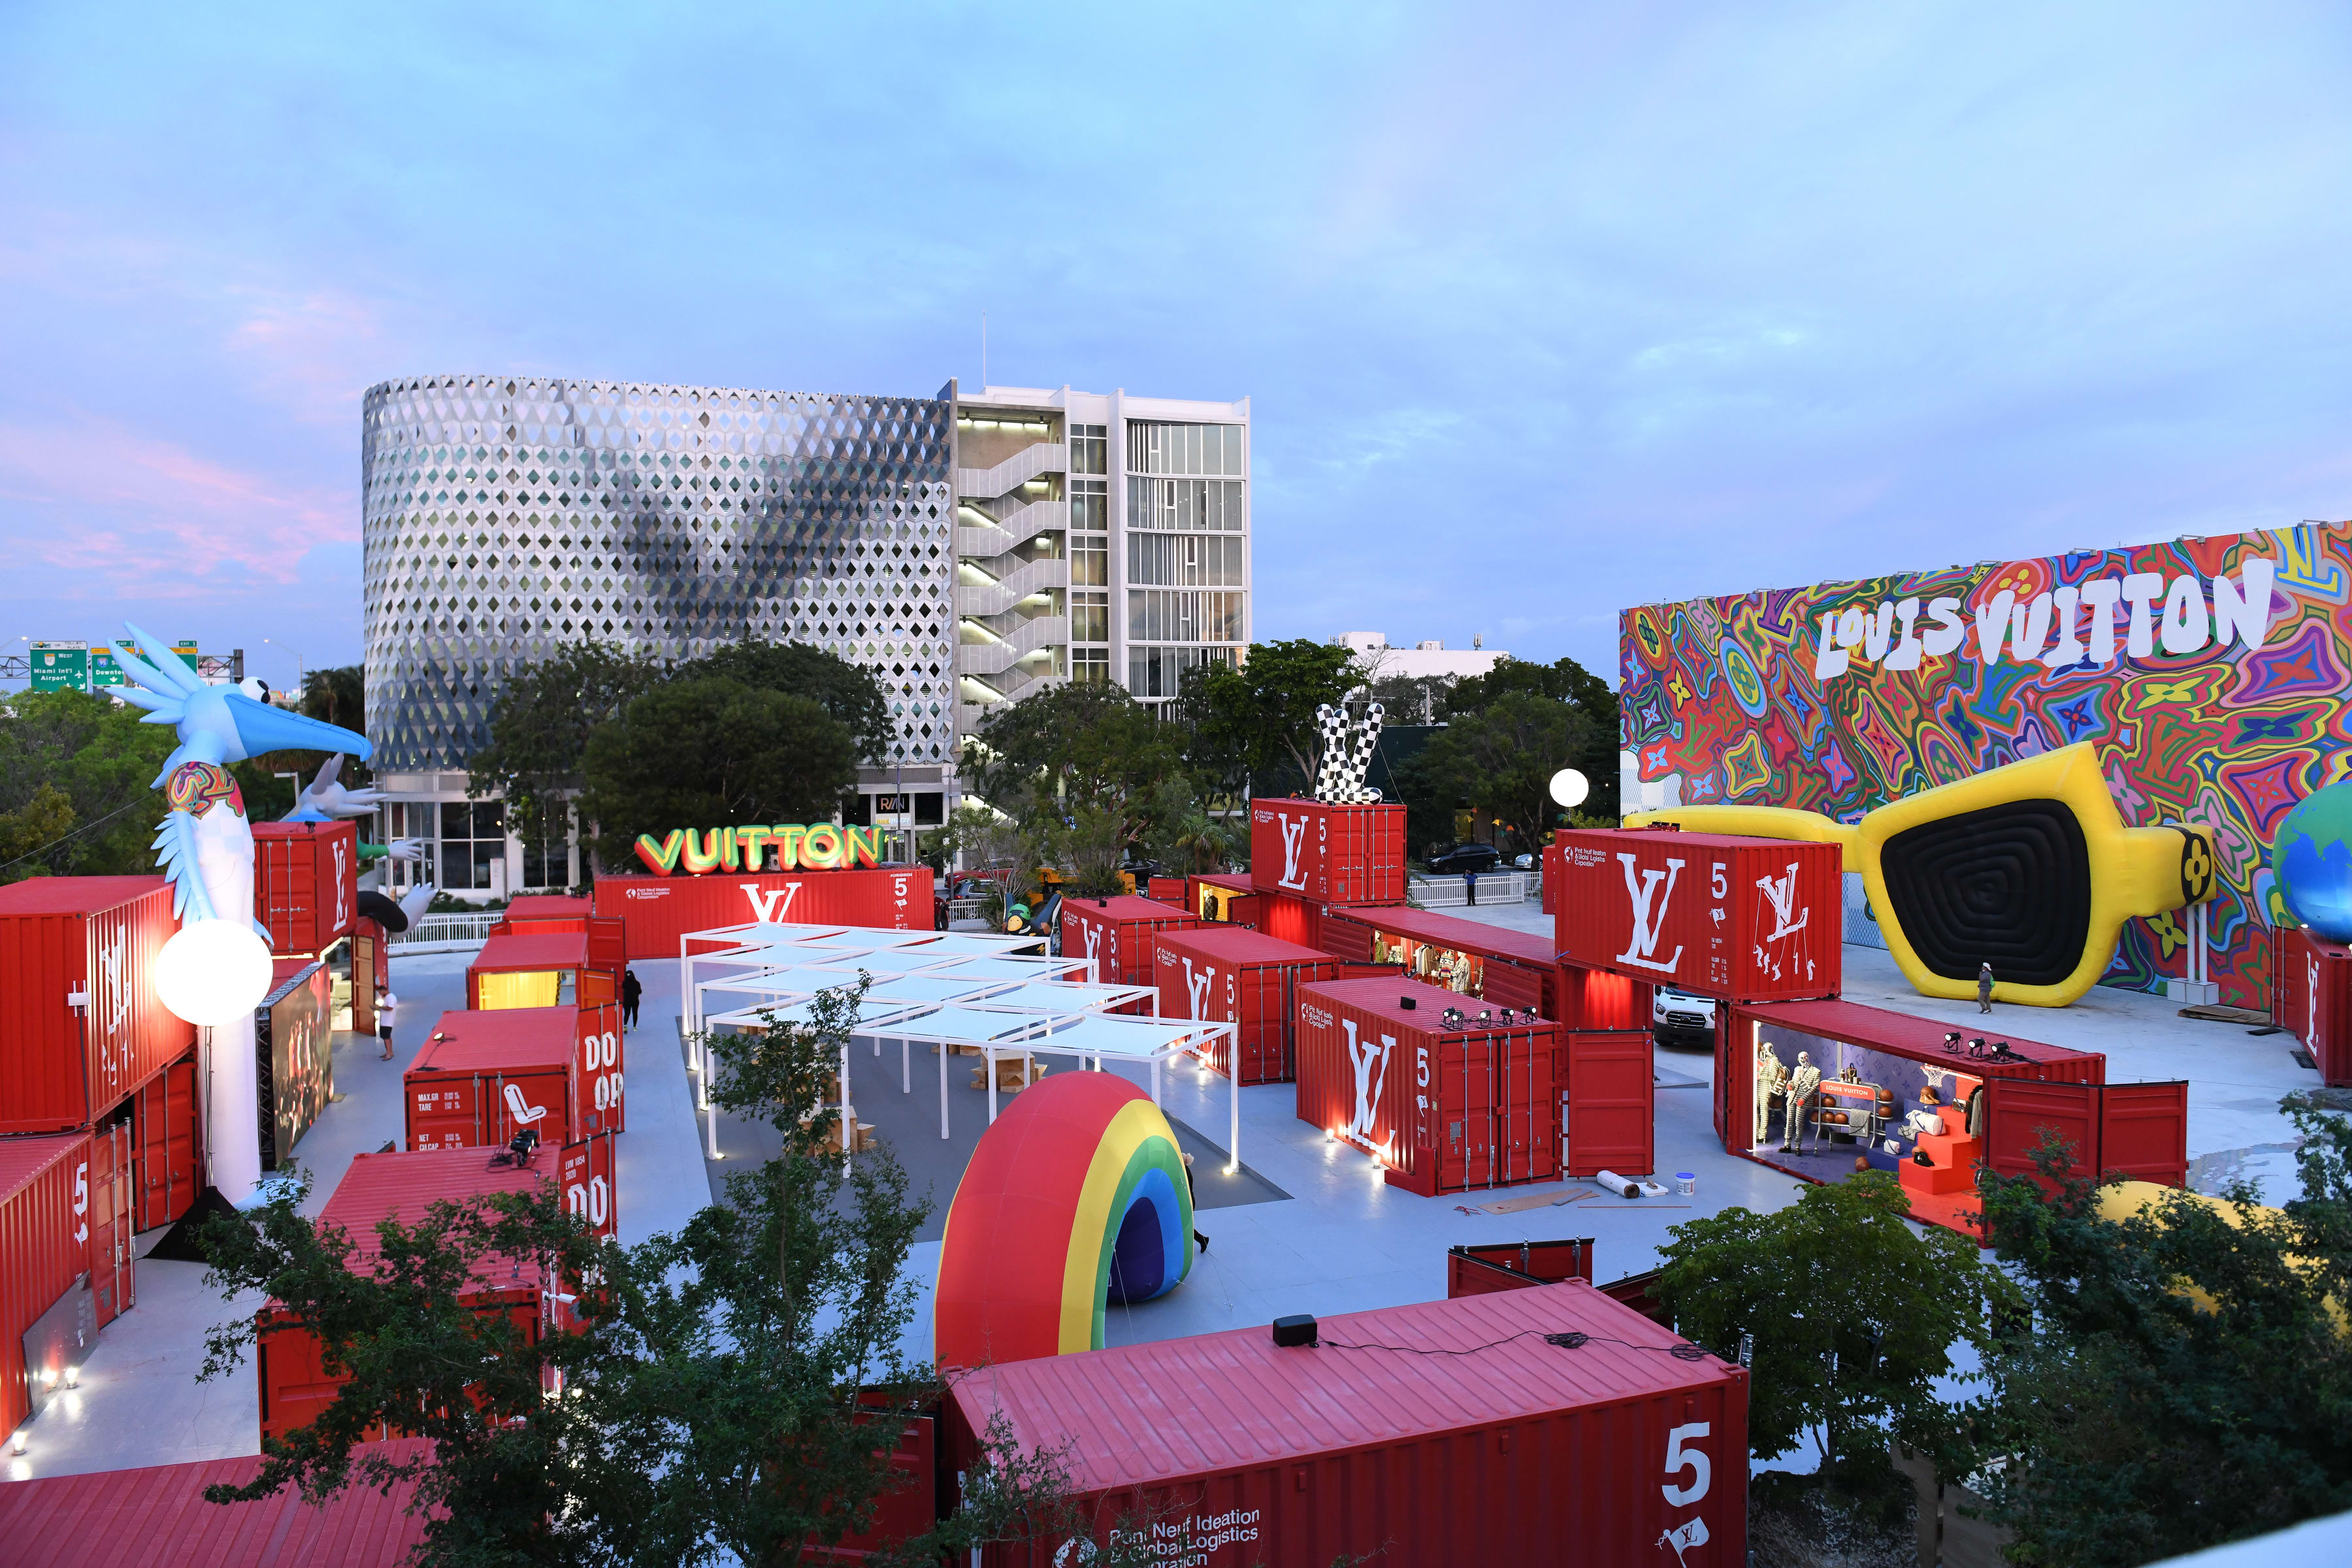 Louis Vuitton Unveils Larger Than Life Installation in Miami